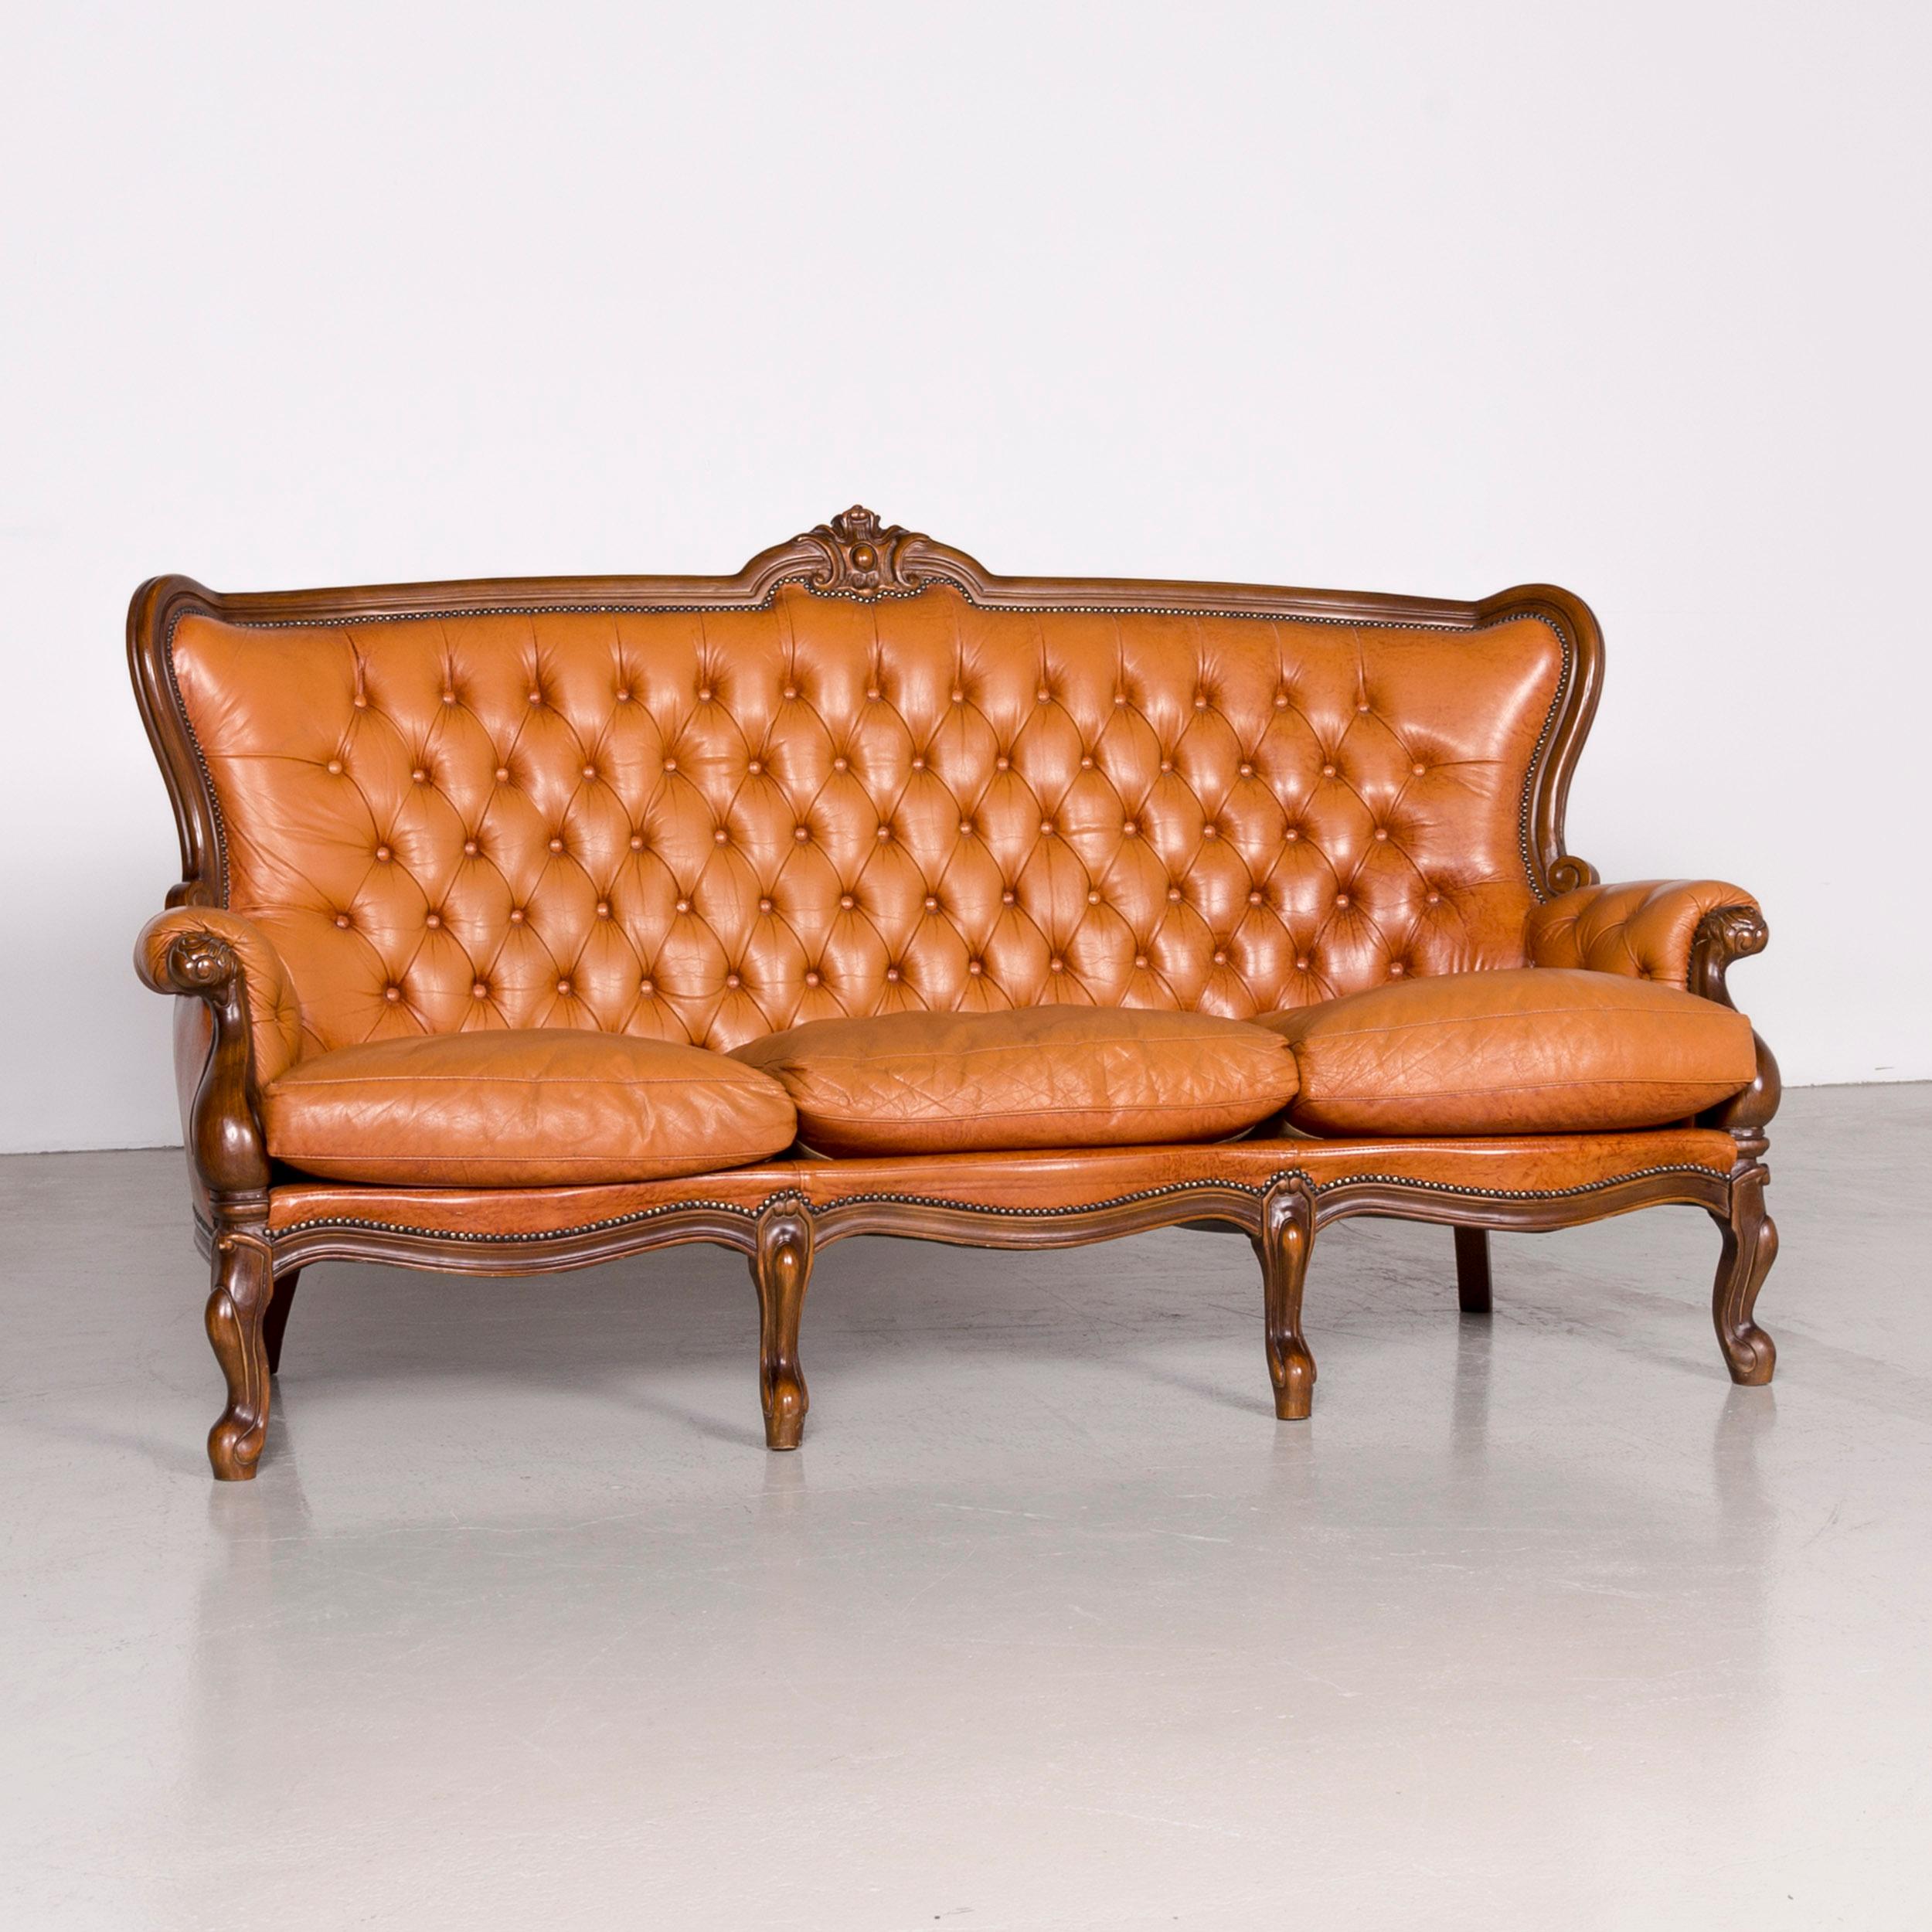 British Chesterfield Leather Sofa Brown Vintage Retro Couch For Sale